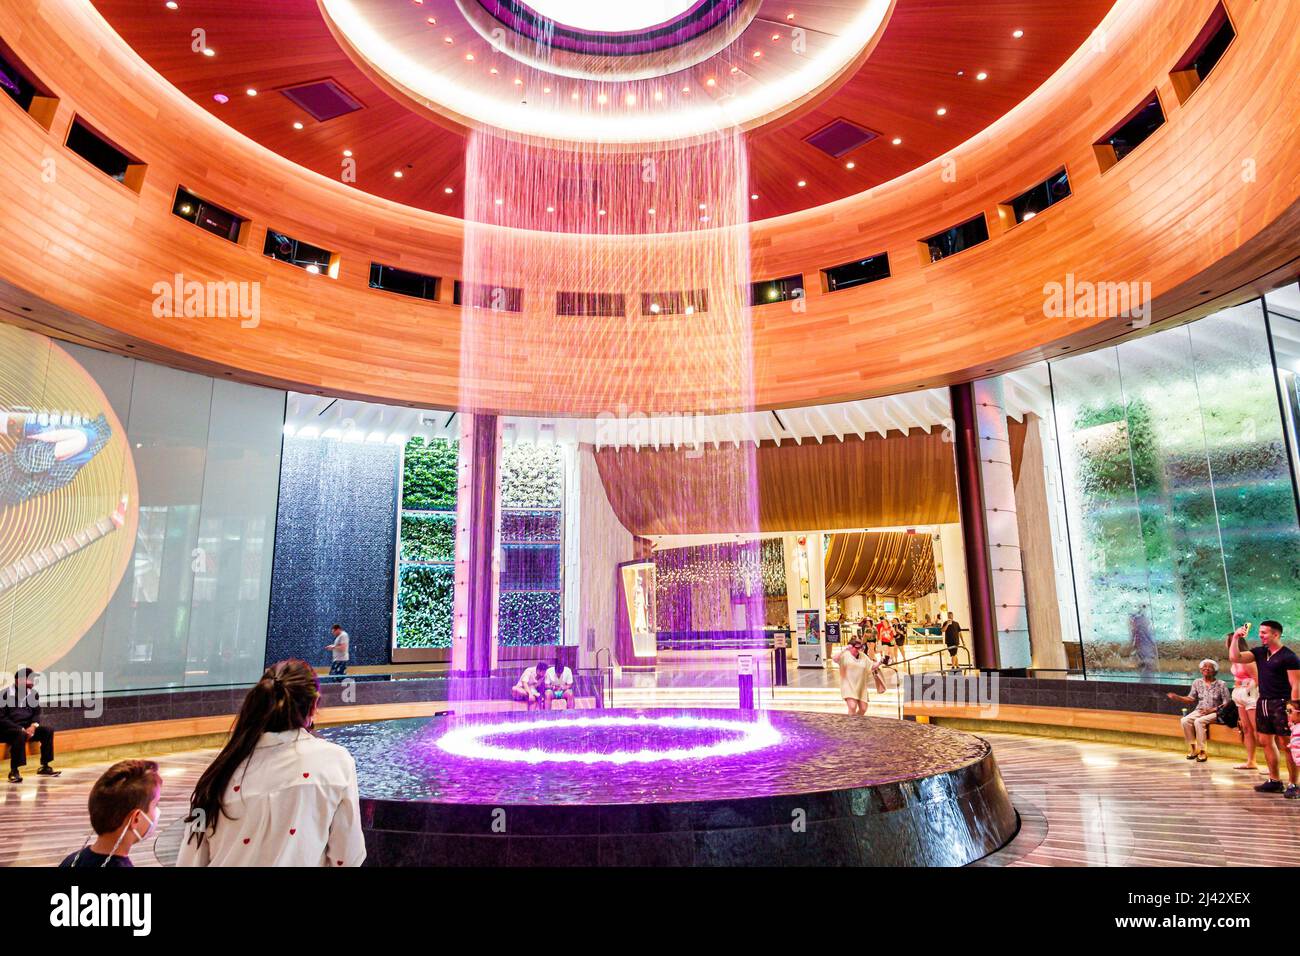 Hollywood Florida Seminole Hard Rock Hotel & Casino tribe tribal reservation inside interior The Oculus waterfall circular water fountain light show l Stock Photo